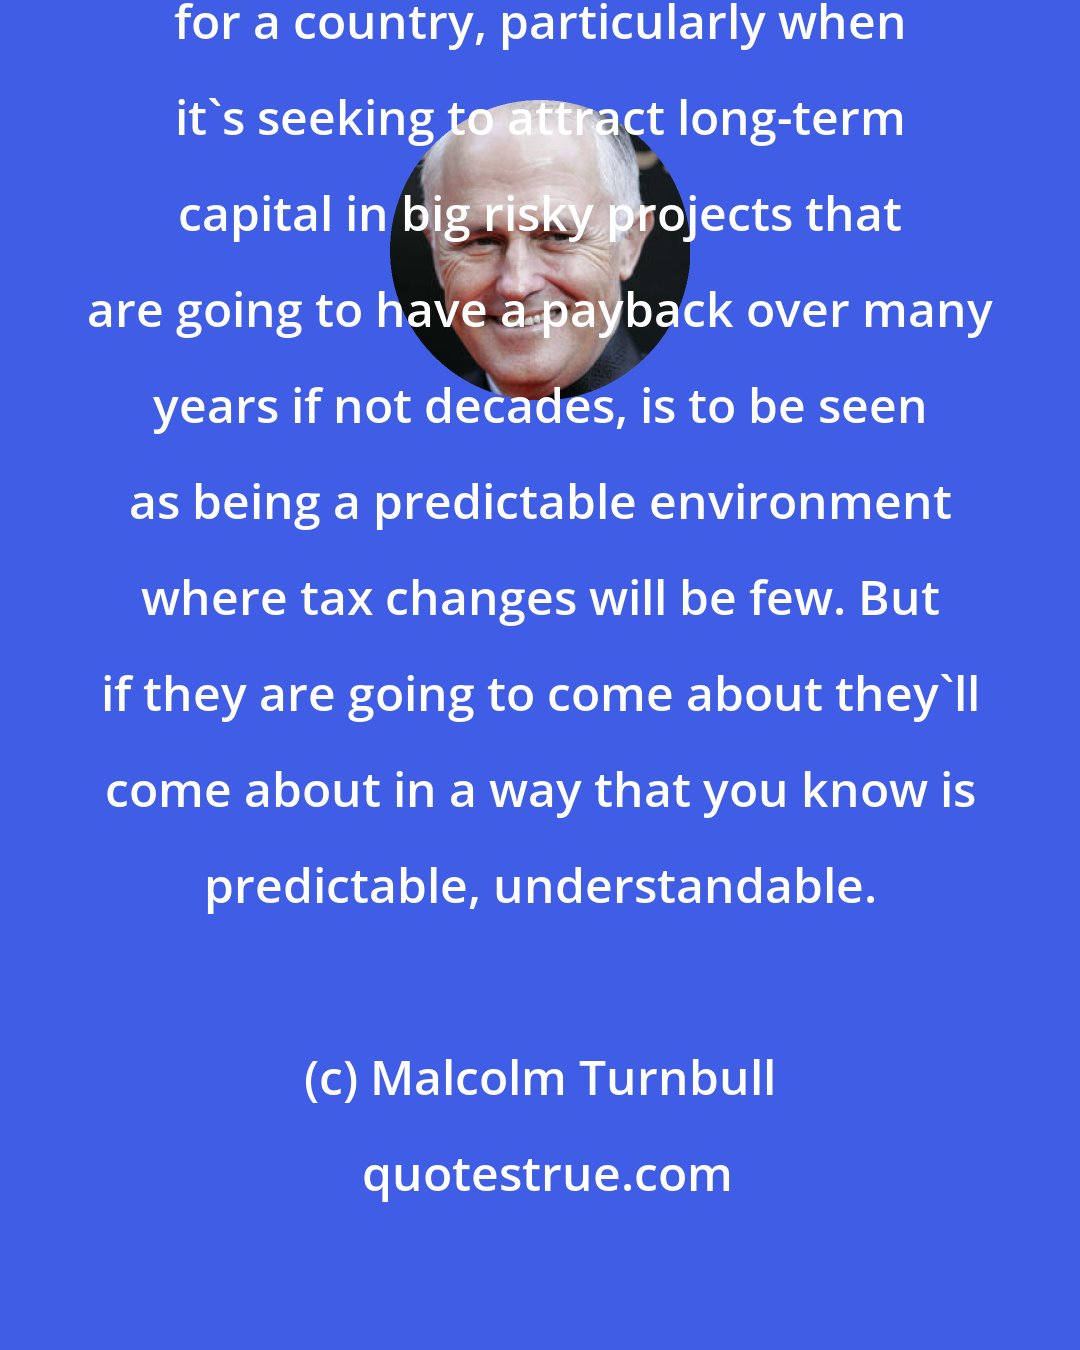 Malcolm Turnbull: One of the most important things for a country, particularly when it's seeking to attract long-term capital in big risky projects that are going to have a payback over many years if not decades, is to be seen as being a predictable environment where tax changes will be few. But if they are going to come about they'll come about in a way that you know is predictable, understandable.